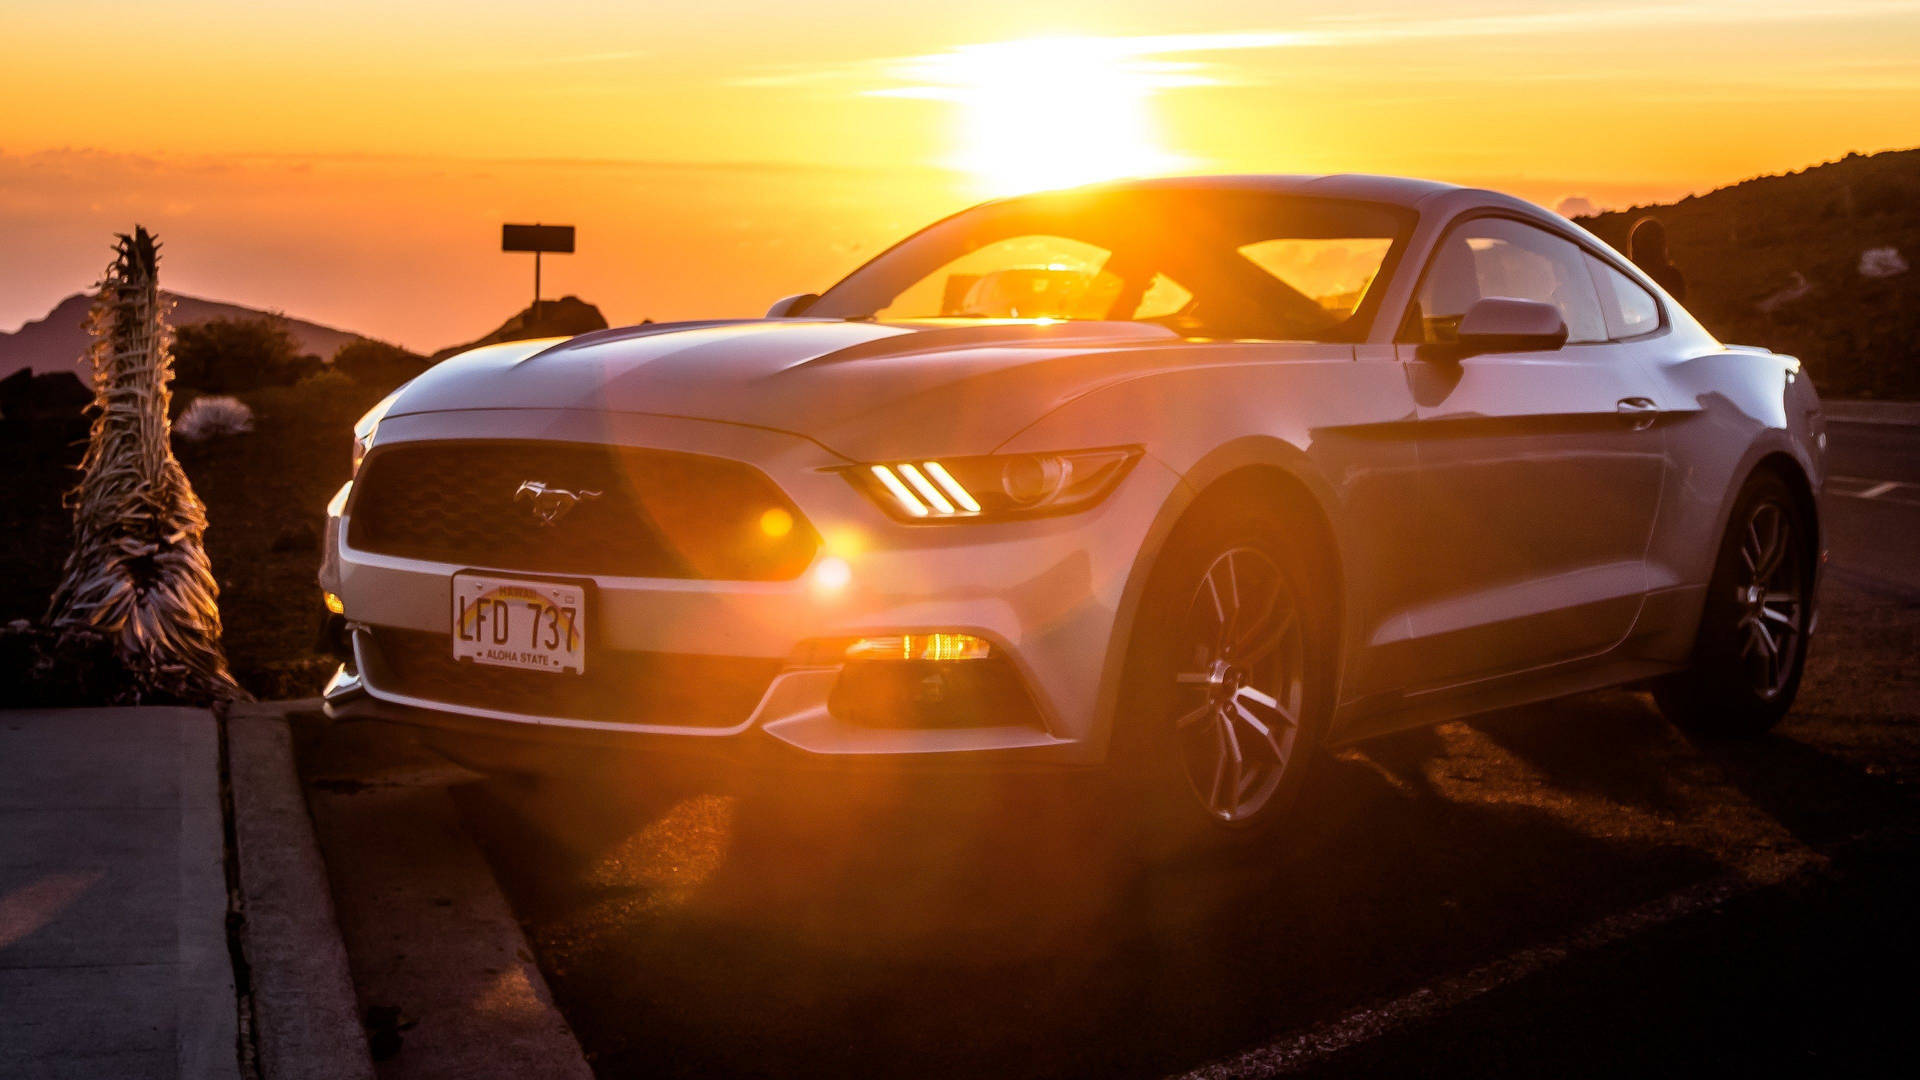 4K Ultra HD Mustang With Sunset Wallpaper